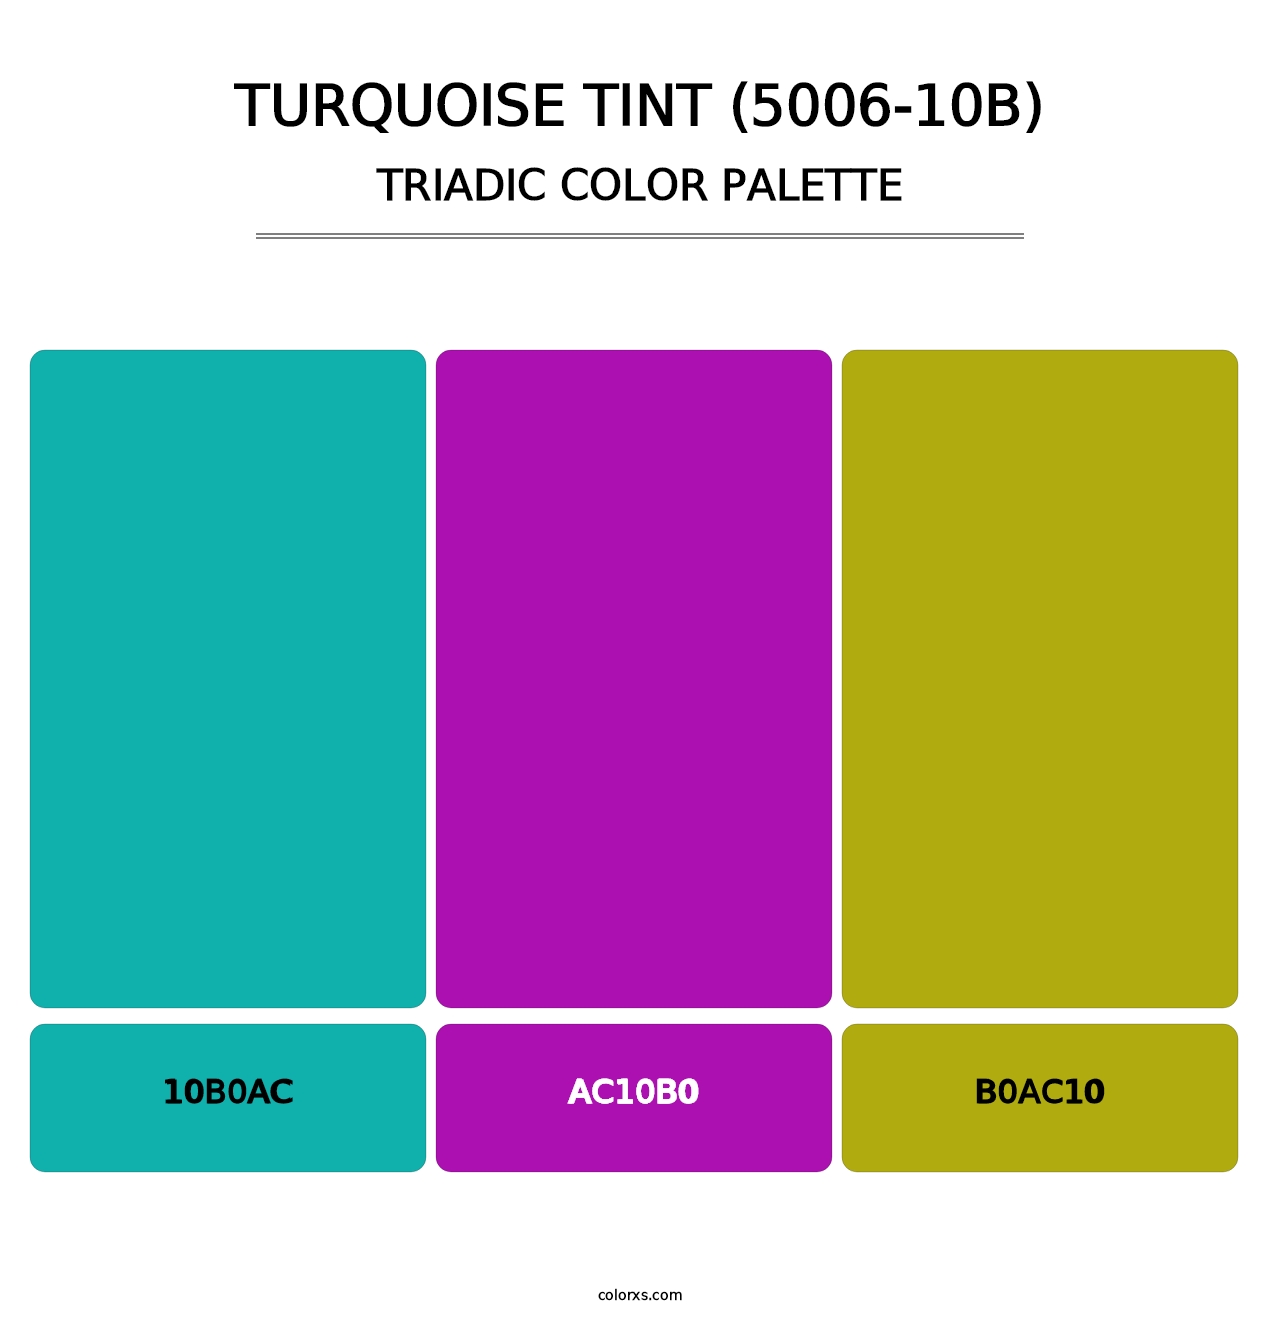 Turquoise Tint (5006-10B) - Triadic Color Palette